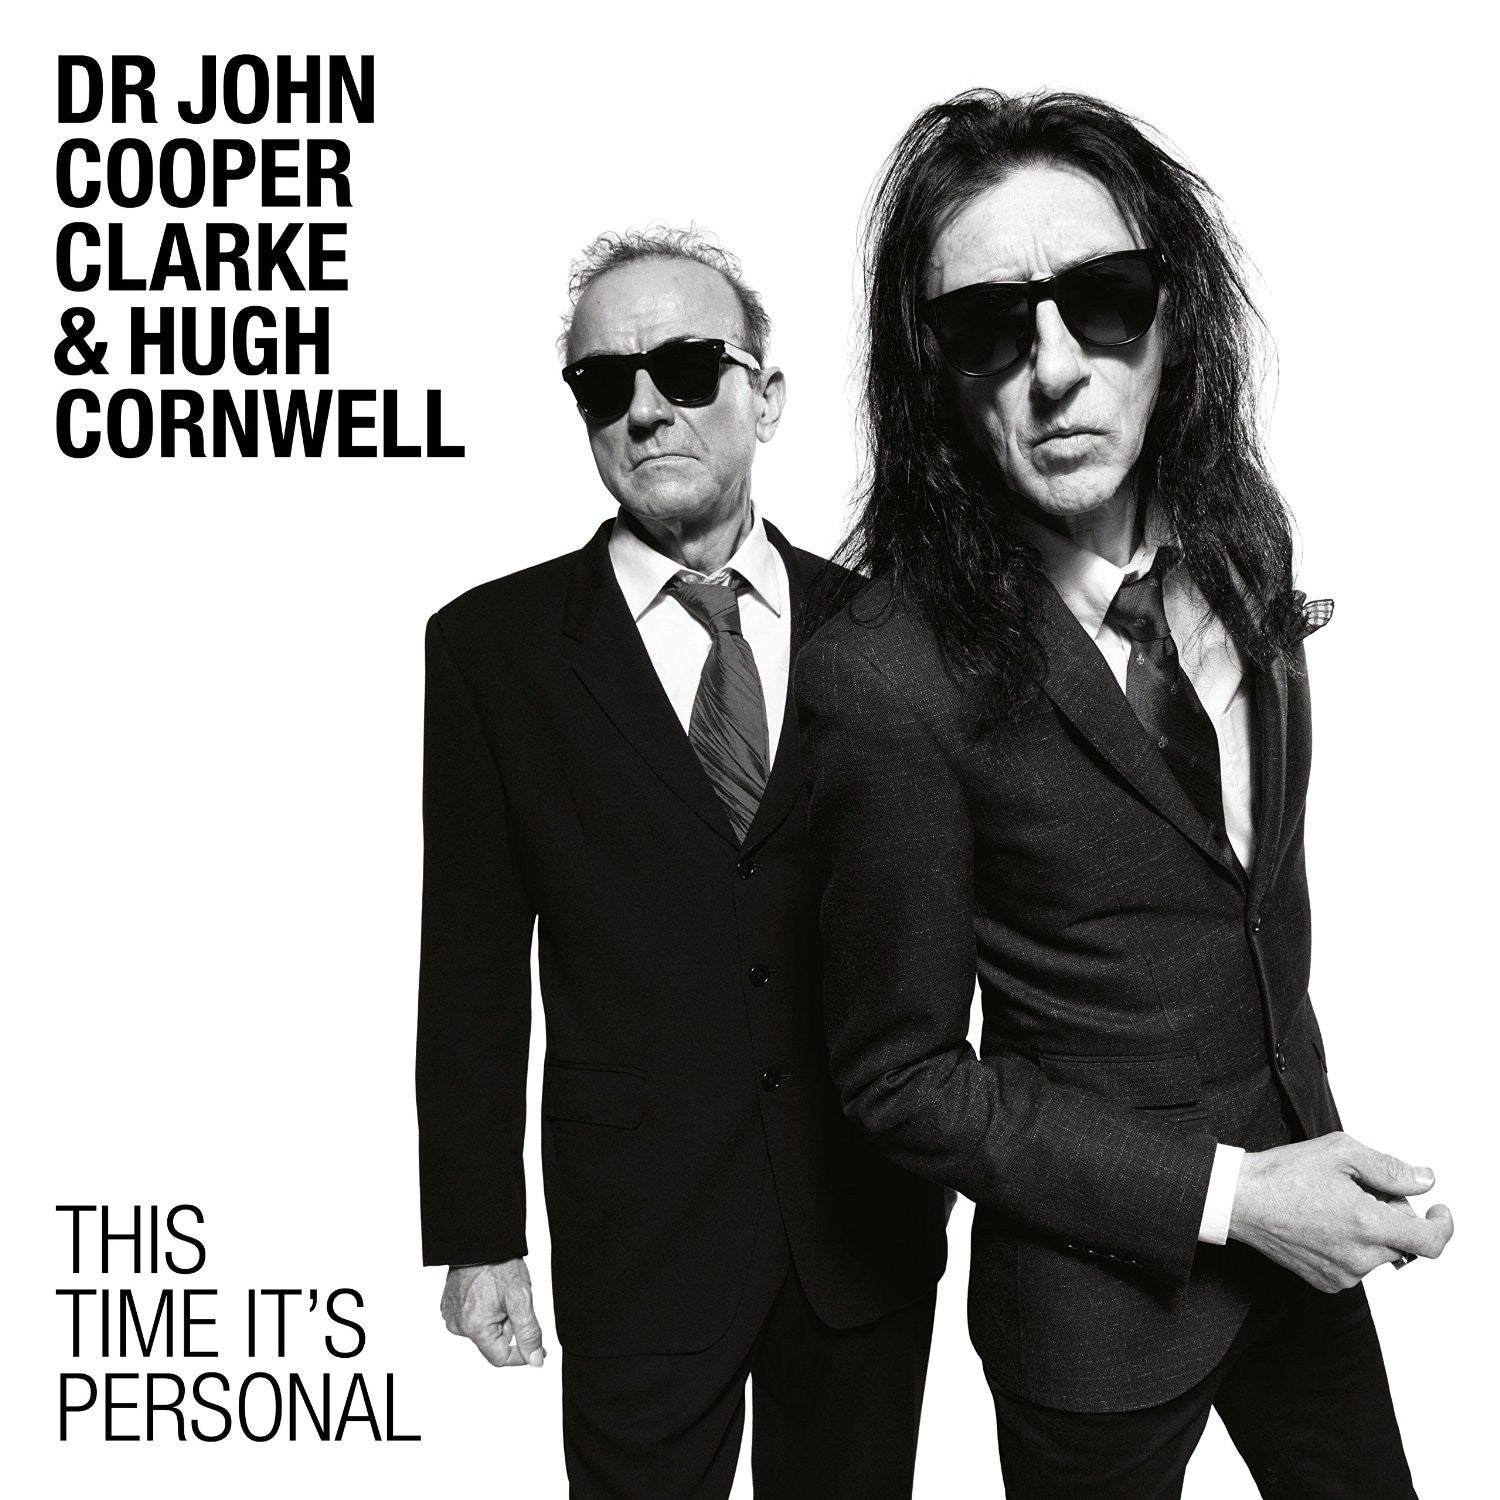 Dr John Cooper Clarke & Hugh Cornwell - This Time It's Personal CD